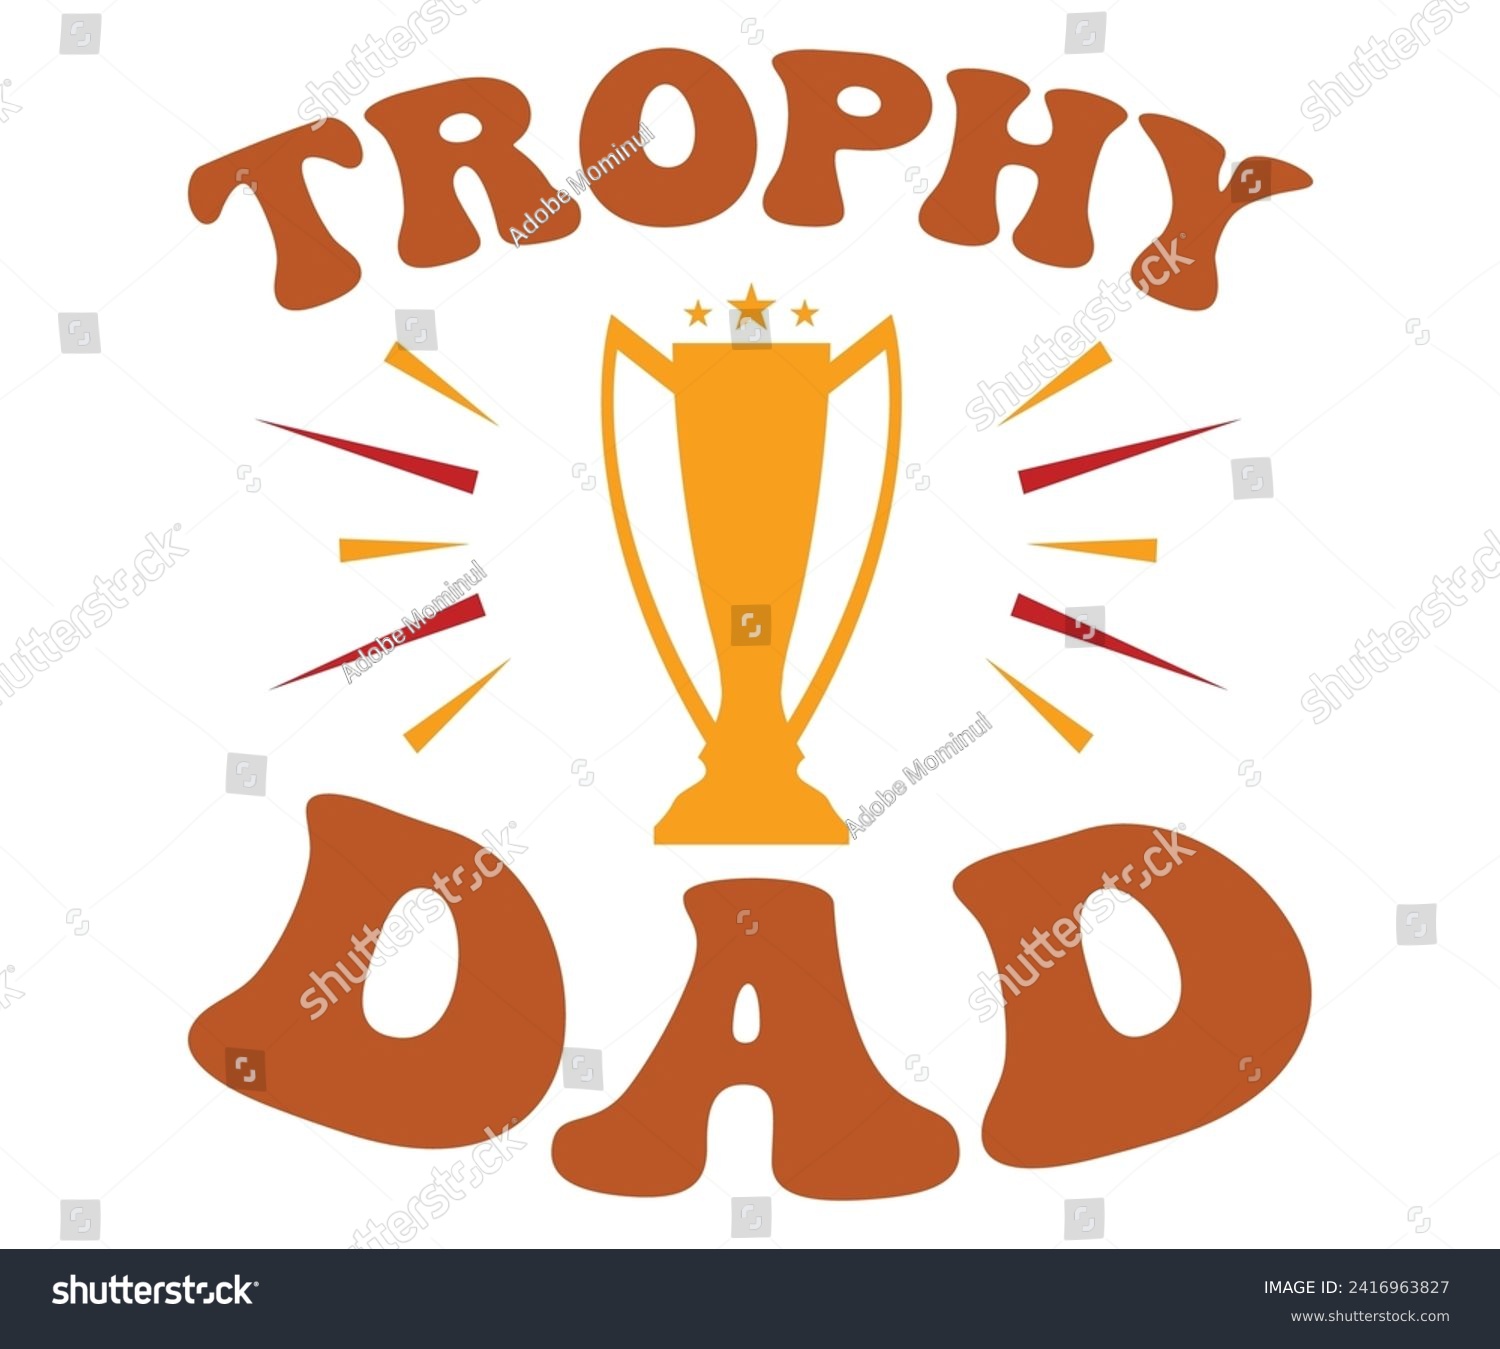 SVG of Trophy Dad Svg,Father's Day Svg,Papa svg,Grandpa Svg,Father's Day Saying Qoutes,Dad Svg,Funny Father, Gift For Dad Svg,Daddy Svg,Family Svg,T shirt Design,Svg Cut File,Typography svg